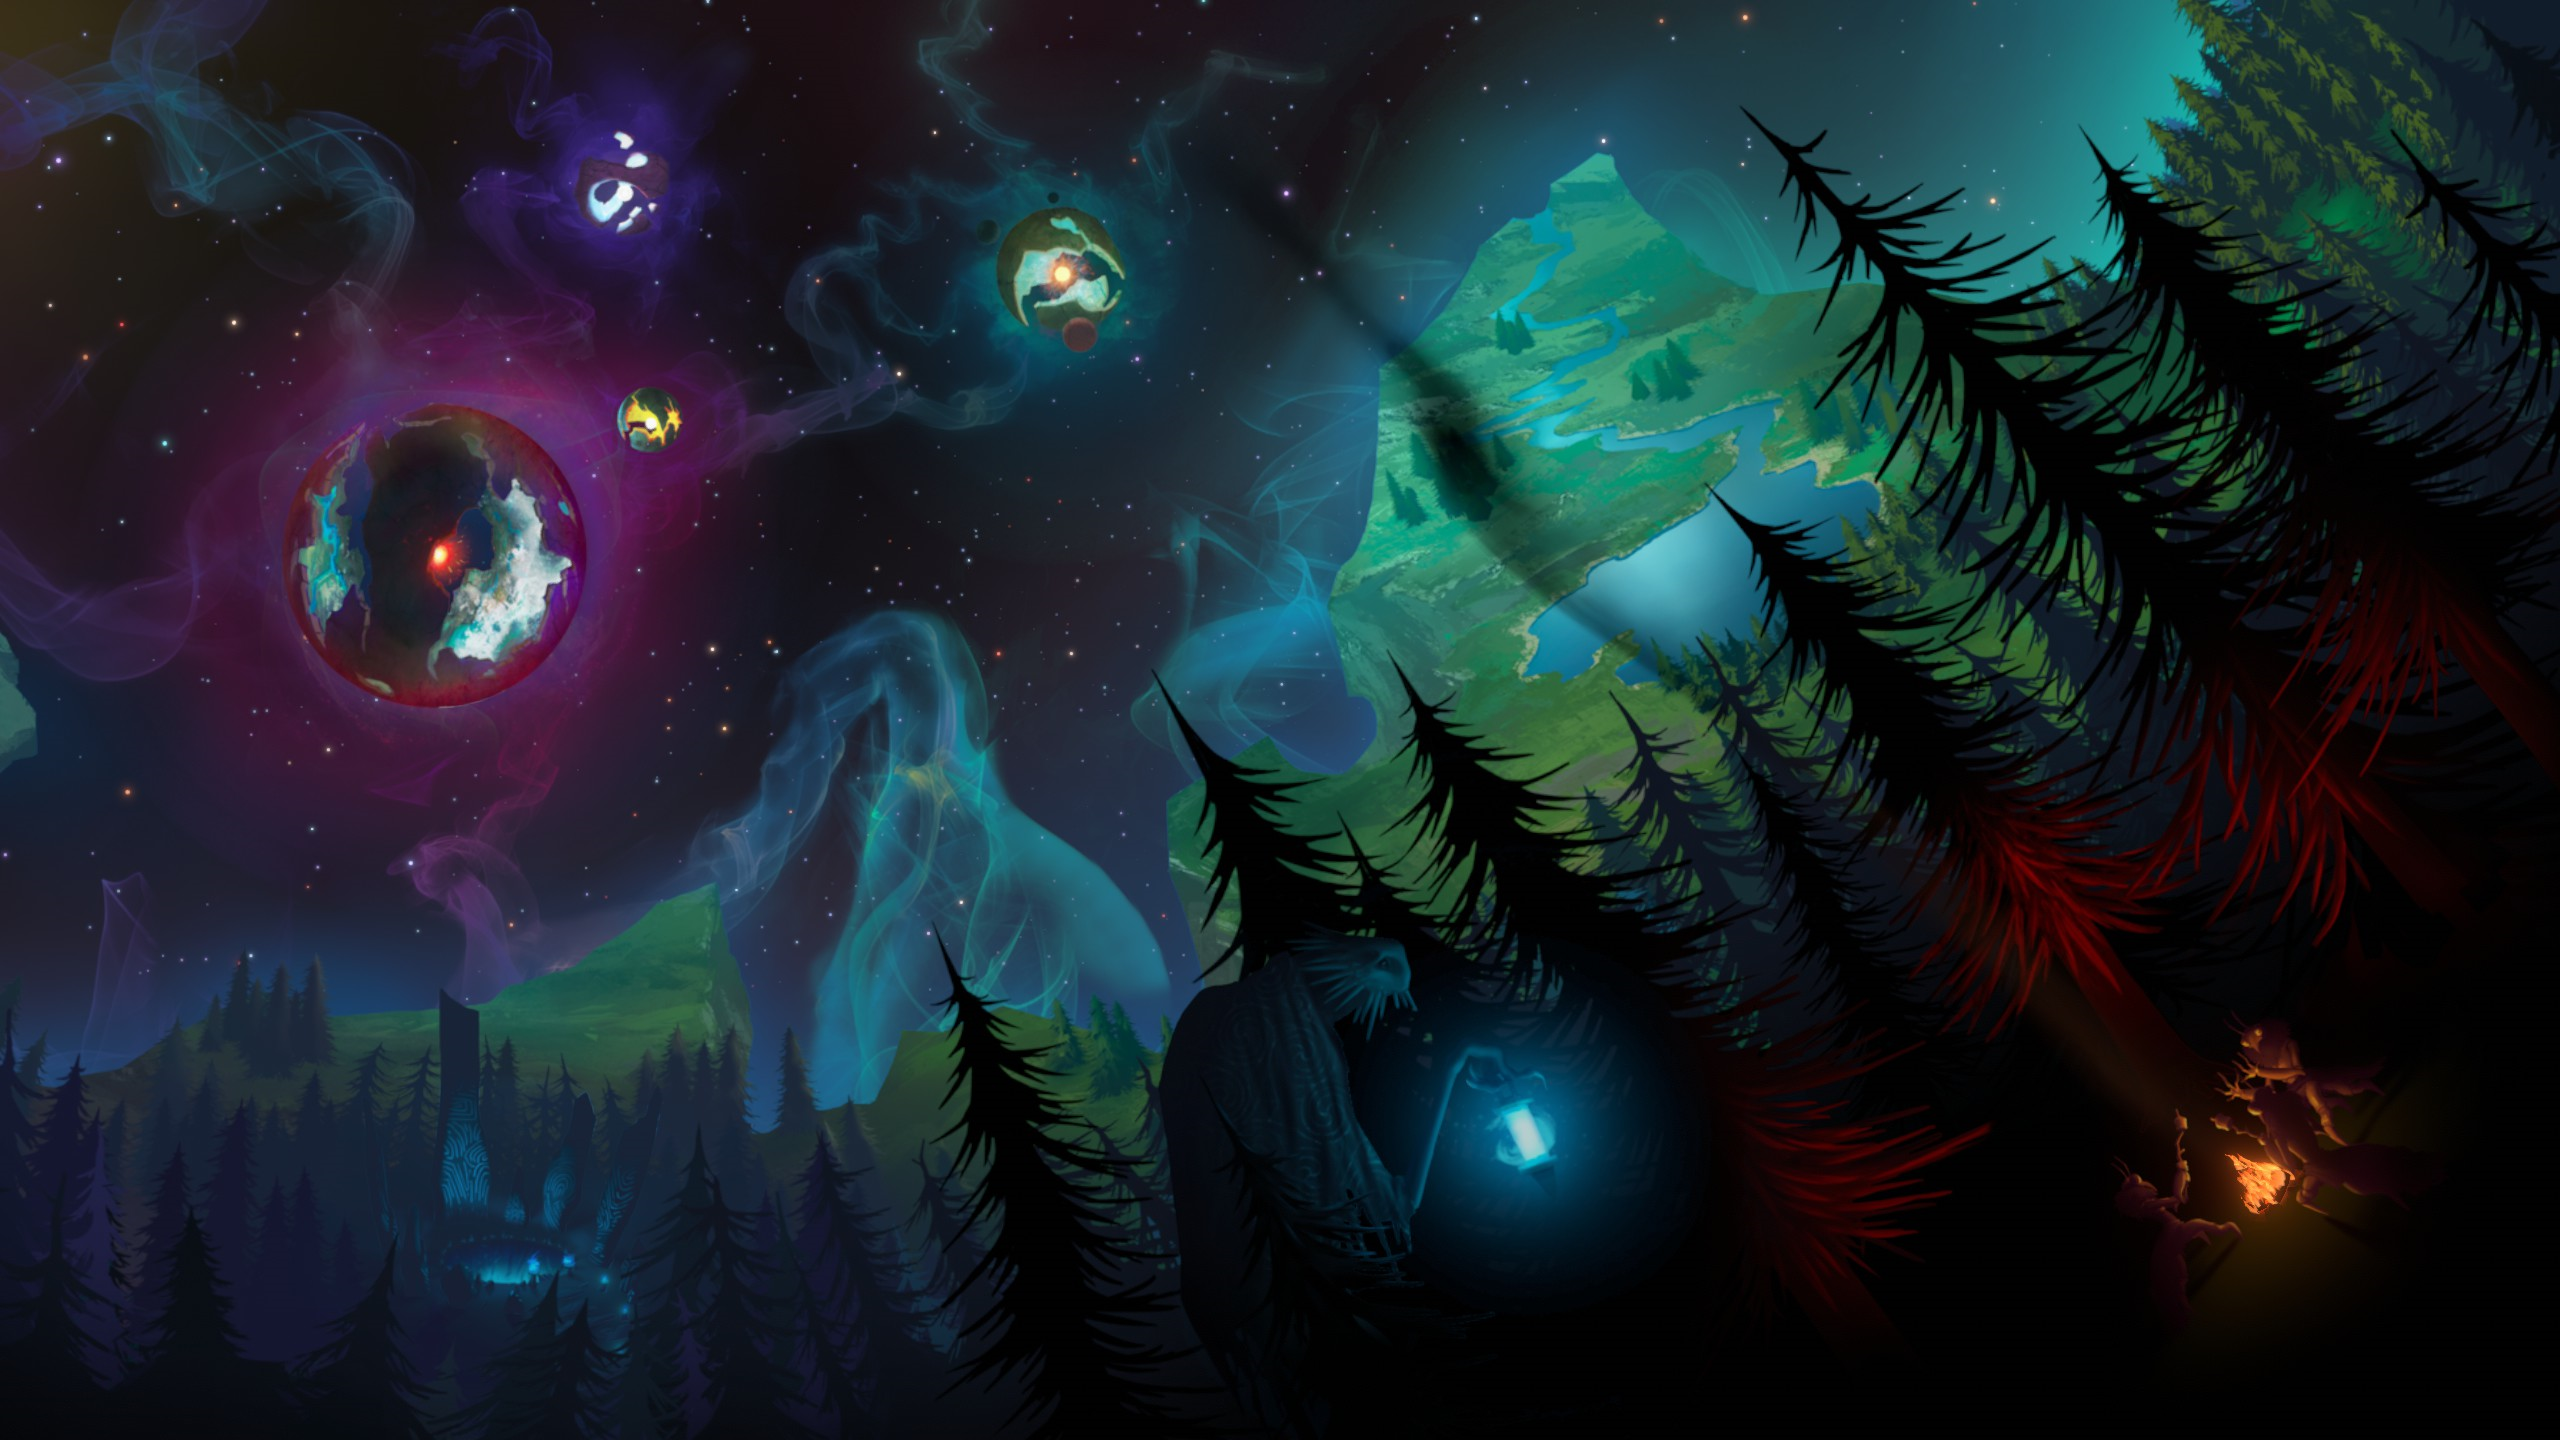 Outer Wilds: Echoes of the Eye DLC adds 14 secret achievements